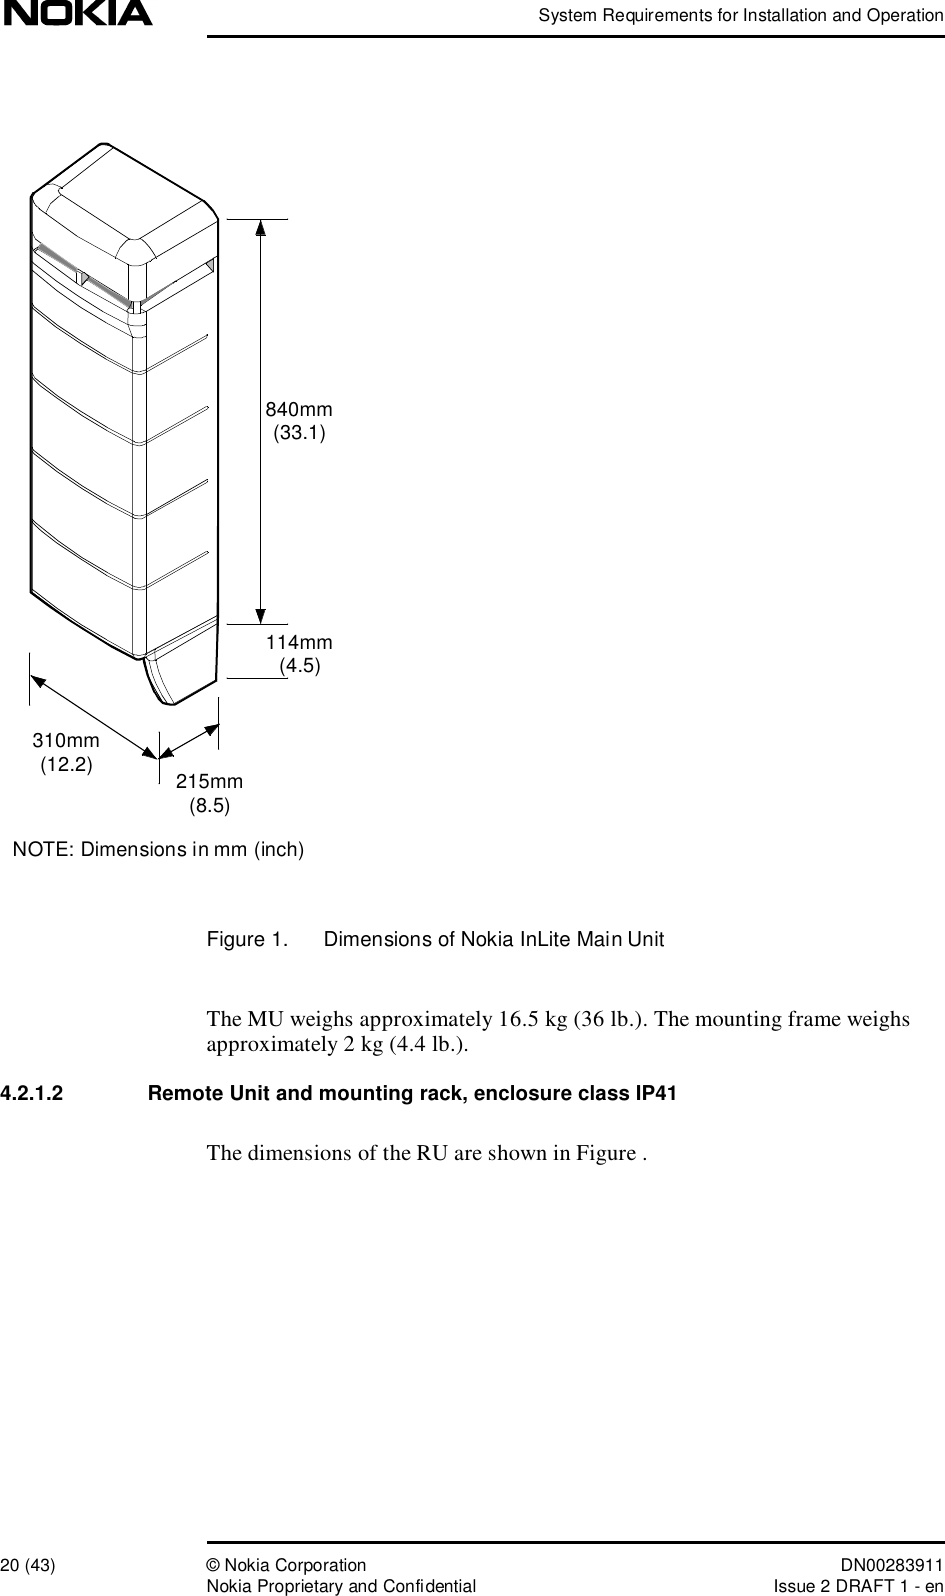 System Requirements for Installation and Operation20 (43)© Nokia Corporation DN00283911Nokia Proprietary and ConfidentialIssue 2 DRAFT 1 - enFigure 1.  Dimensions of Nokia InLite Main UnitThe MU weighs approximately 16.5 kg (36 lb.). The mounting frame weighs approximately 2 kg (4.4 lb.). 4.2.1.2  Remote Unit and mounting rack, enclosure class IP41The dimensions of the RU are shown in Figure . 840mm(33.1)114mm(4.5)215mm(8.5)310mm(12.2)NOTE: Dimensions in mm (inch)